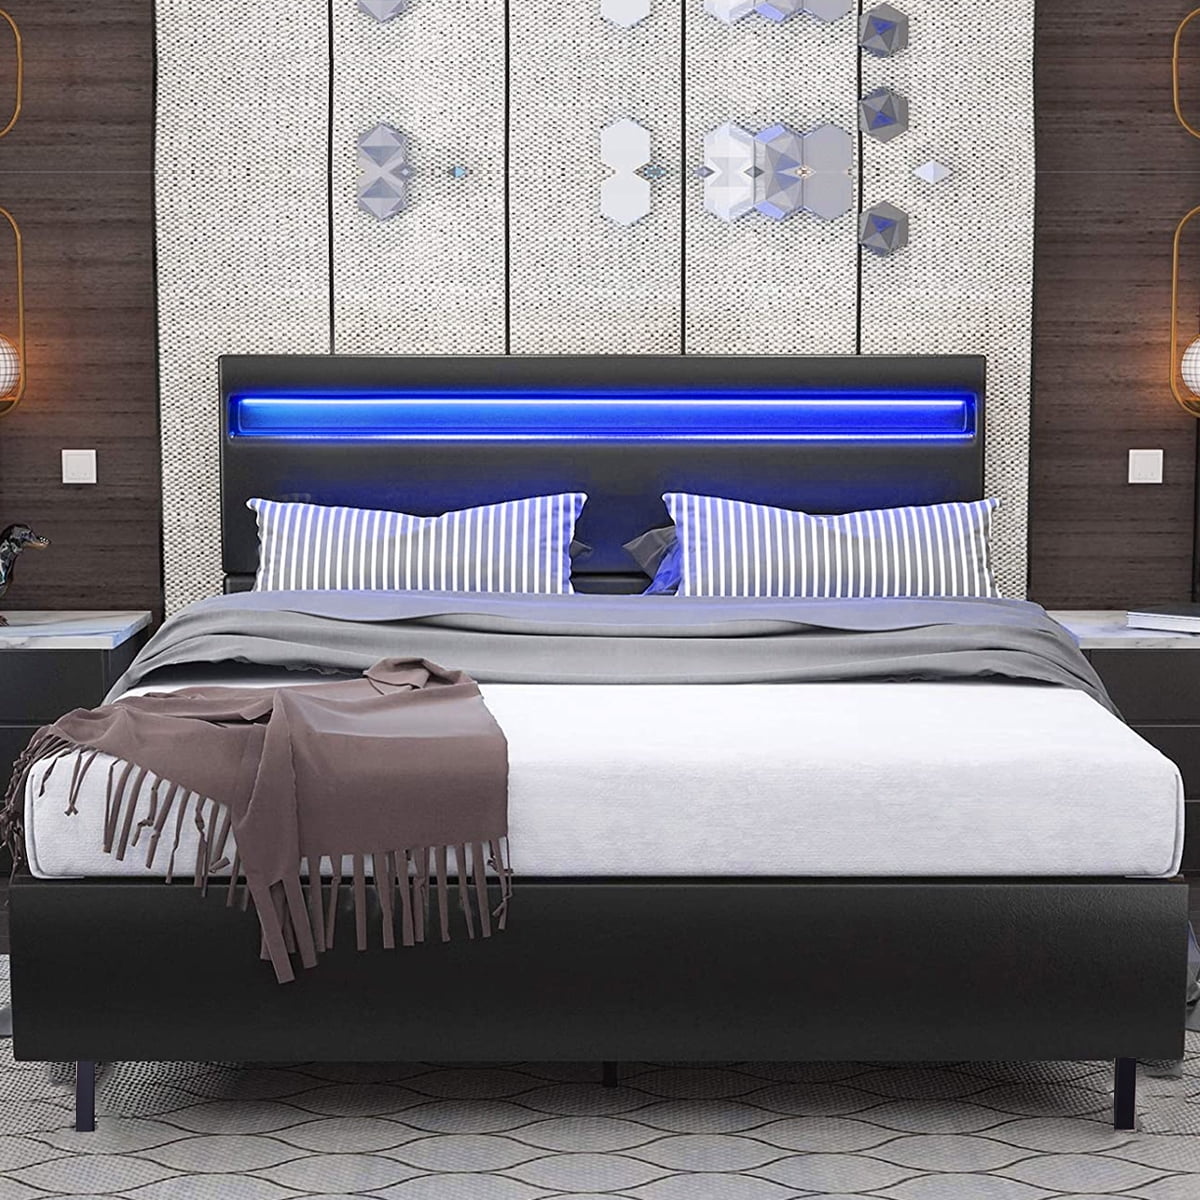 Queen Size Led Bed Frame 41 5 Inch 4, Queen Size Wooden Headboard With Lights